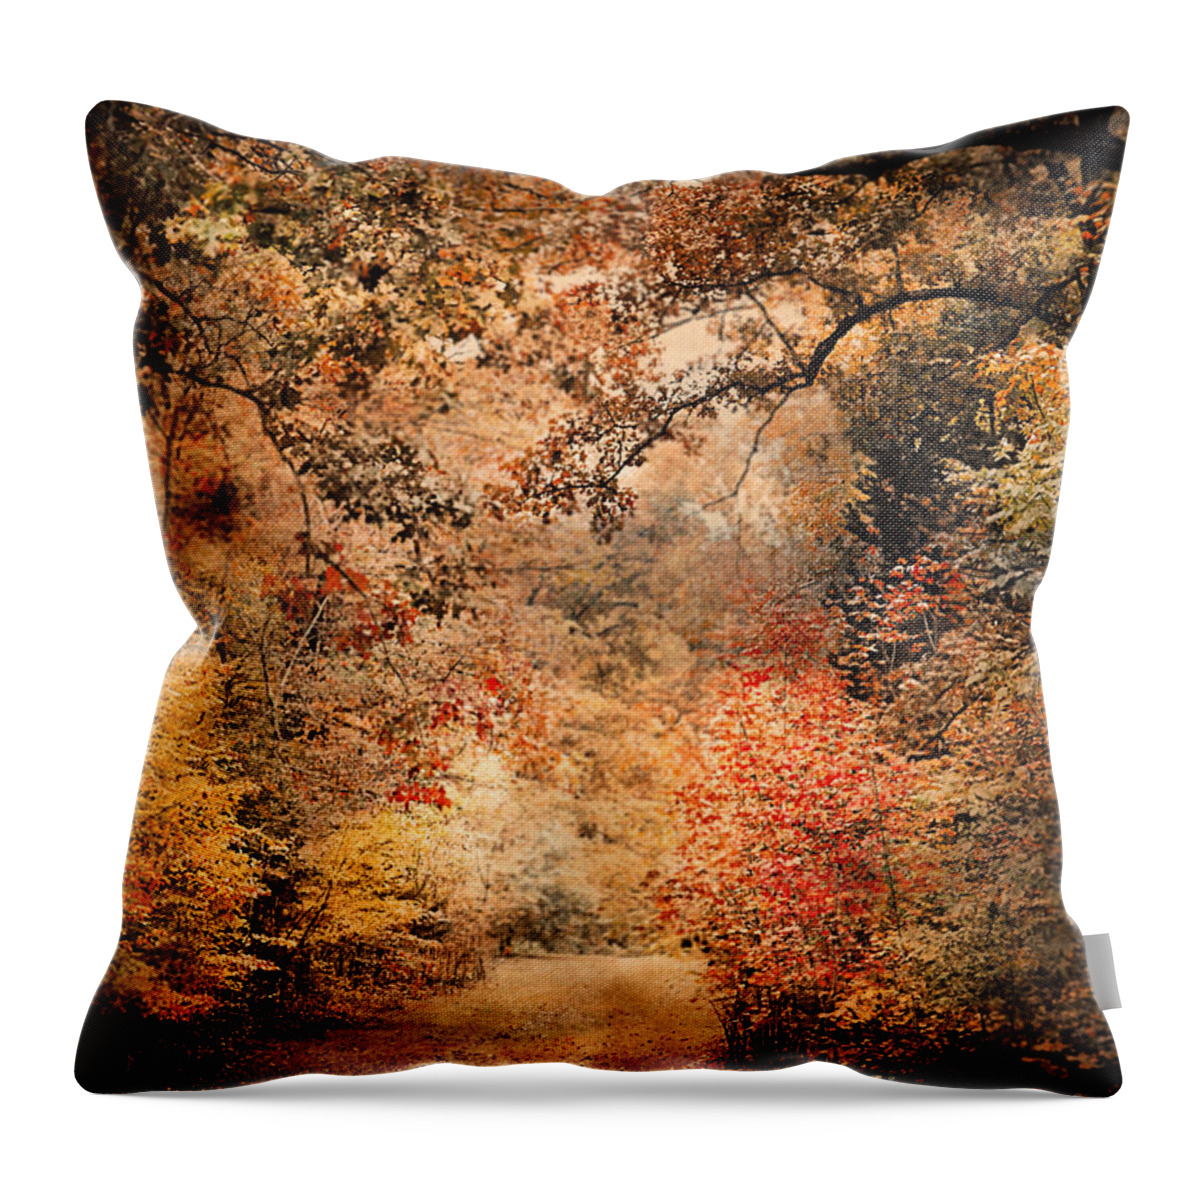 Autumn Throw Pillow featuring the photograph Under the Canopy by Jai Johnson